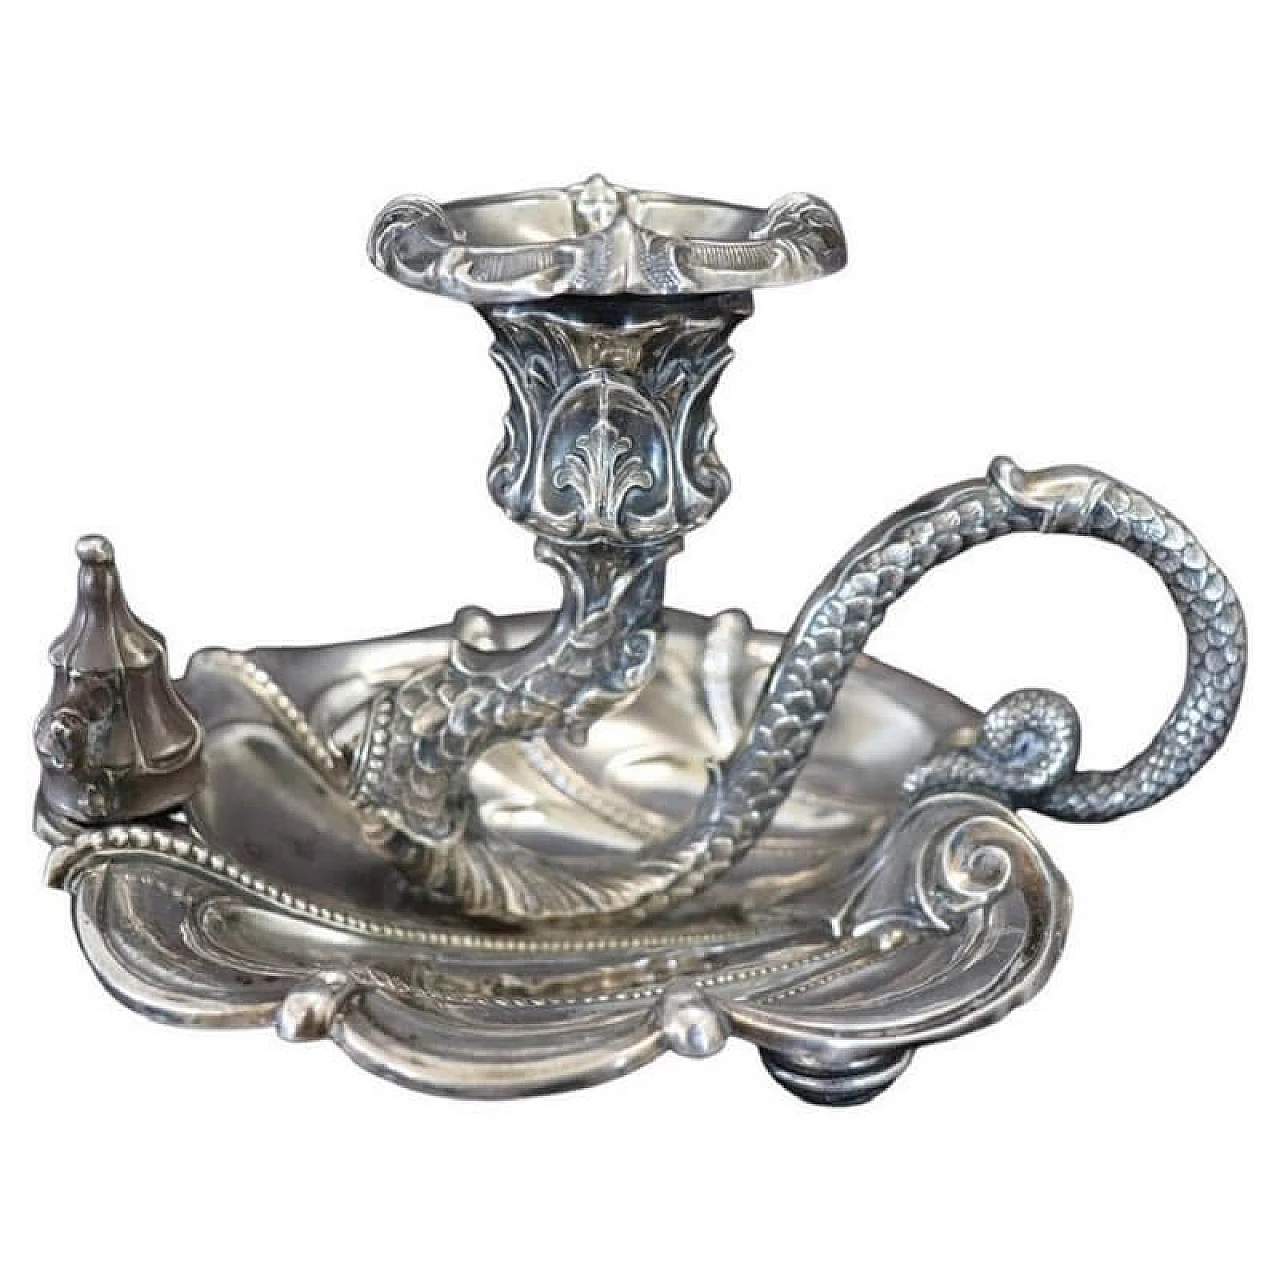 Art Nouveau silver candlestick by Wilhelm Binder, late 19th century 1